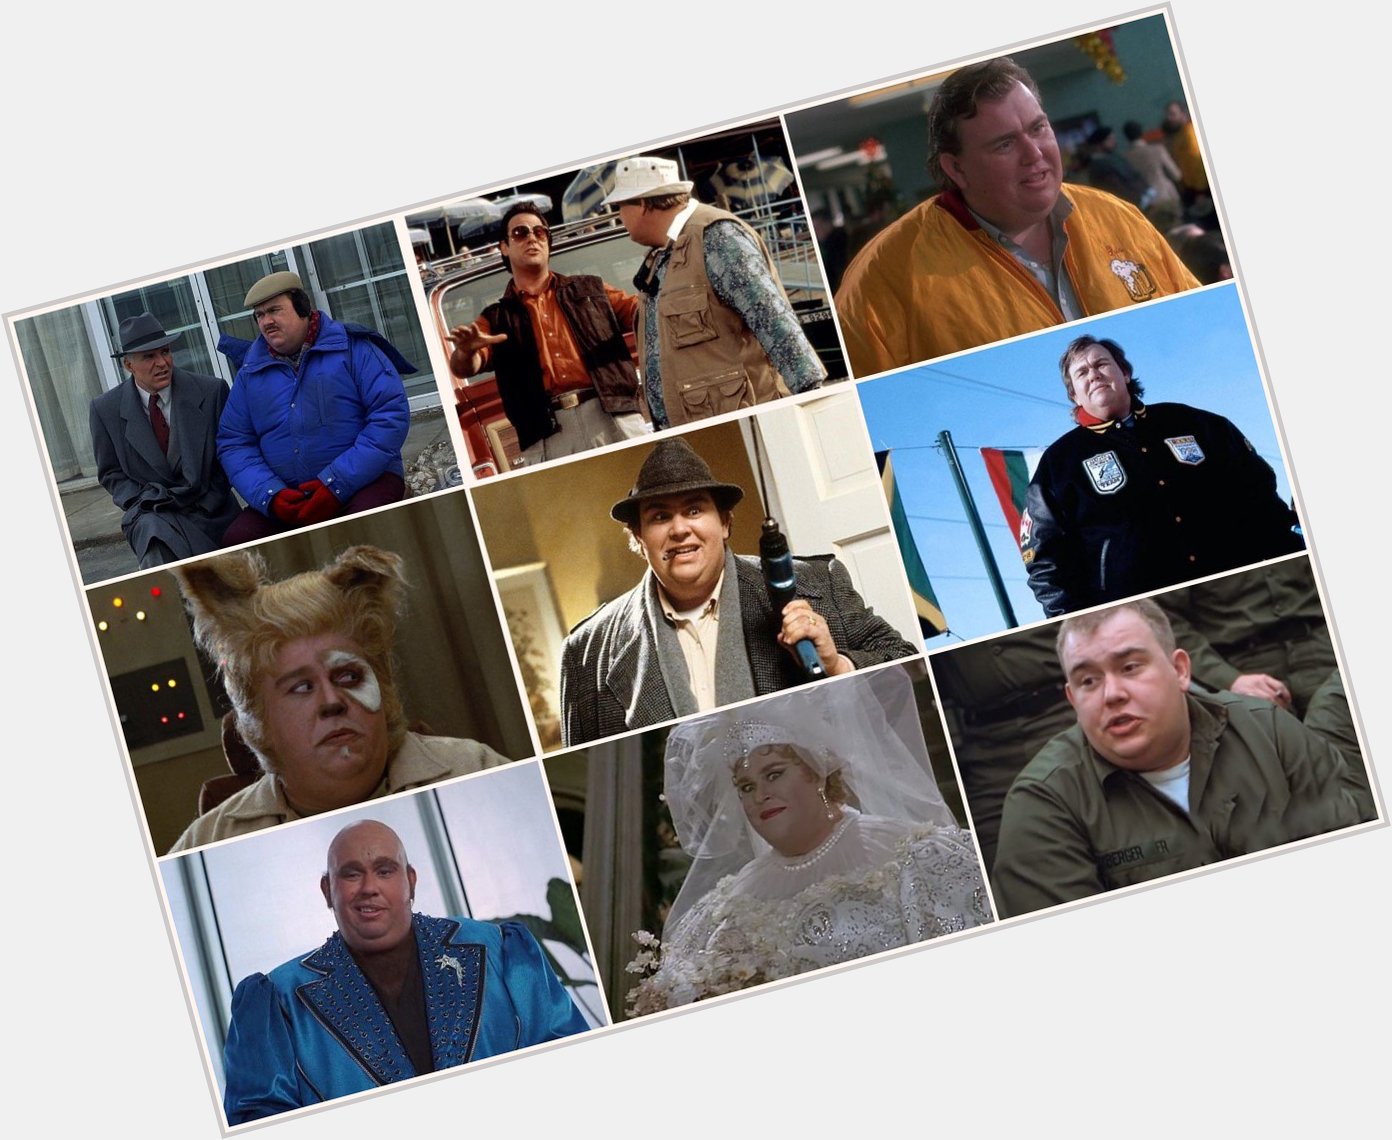 Happy Birthday to our Beloved John Candy! 

Born October 31st, 1950. 